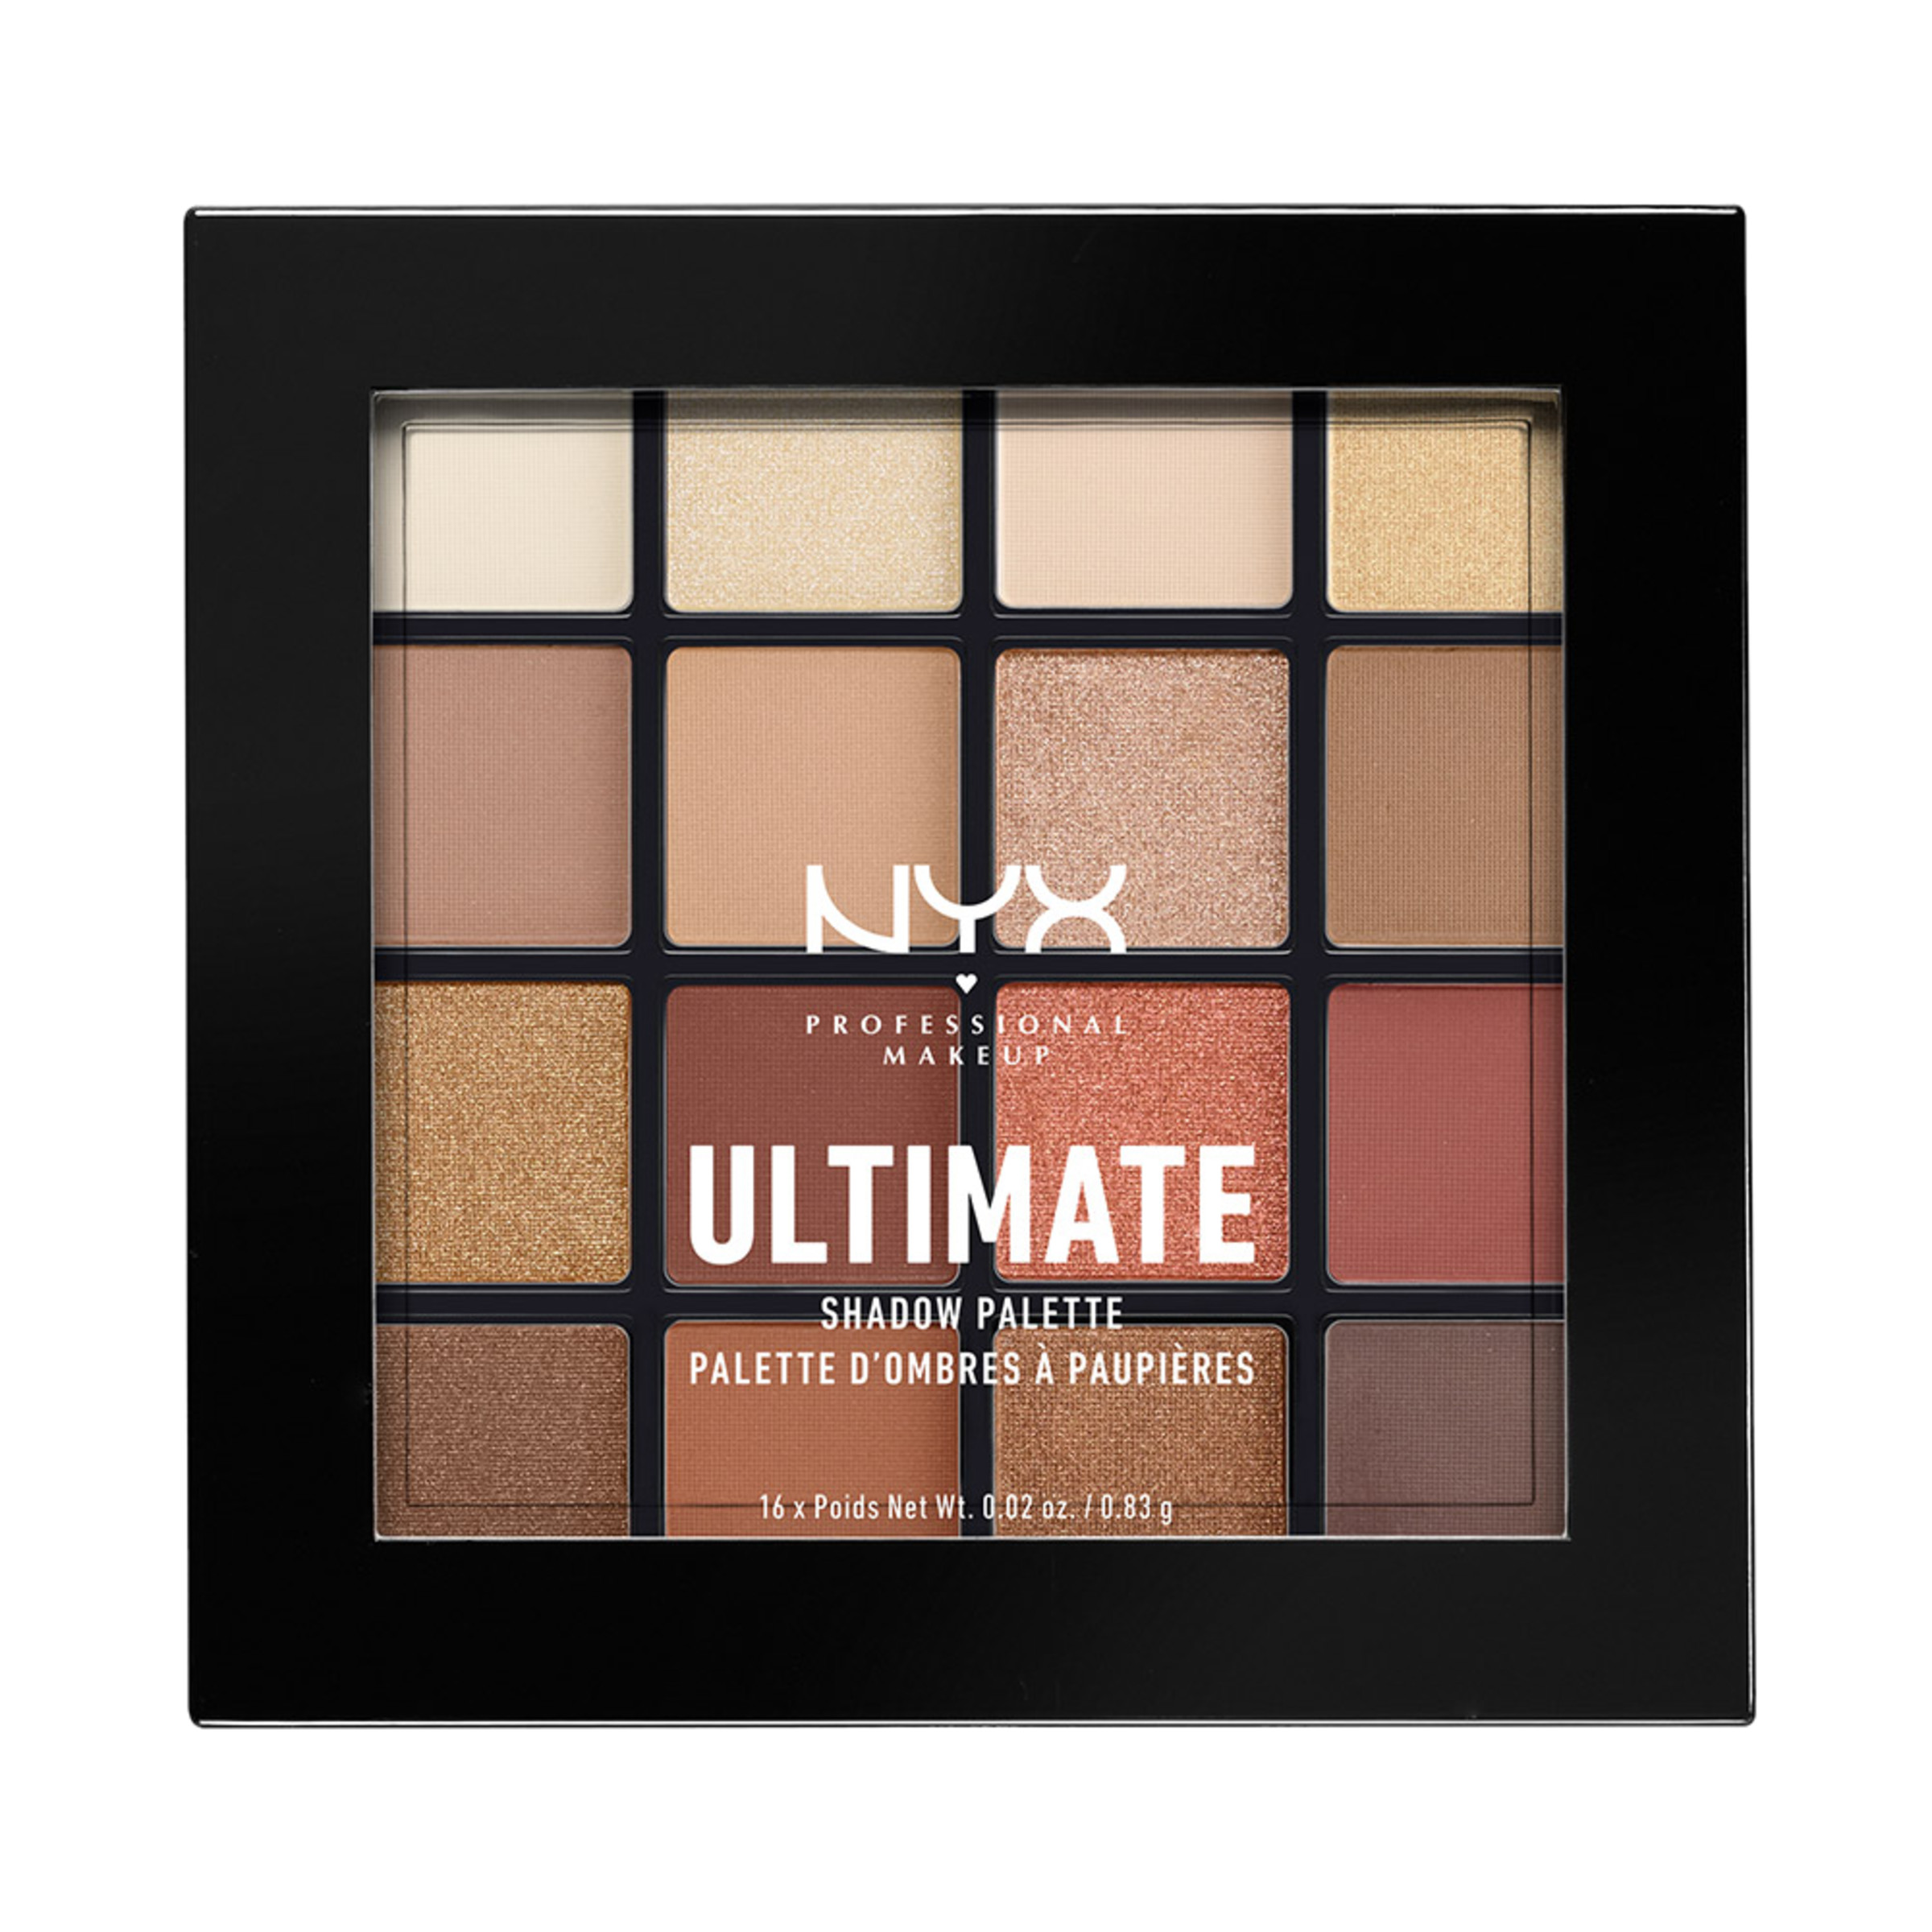 NYX Professional Makeup Ultimate Eye Shadow Palette, Warm Neutrals, 0.32 oz - image 1 of 10